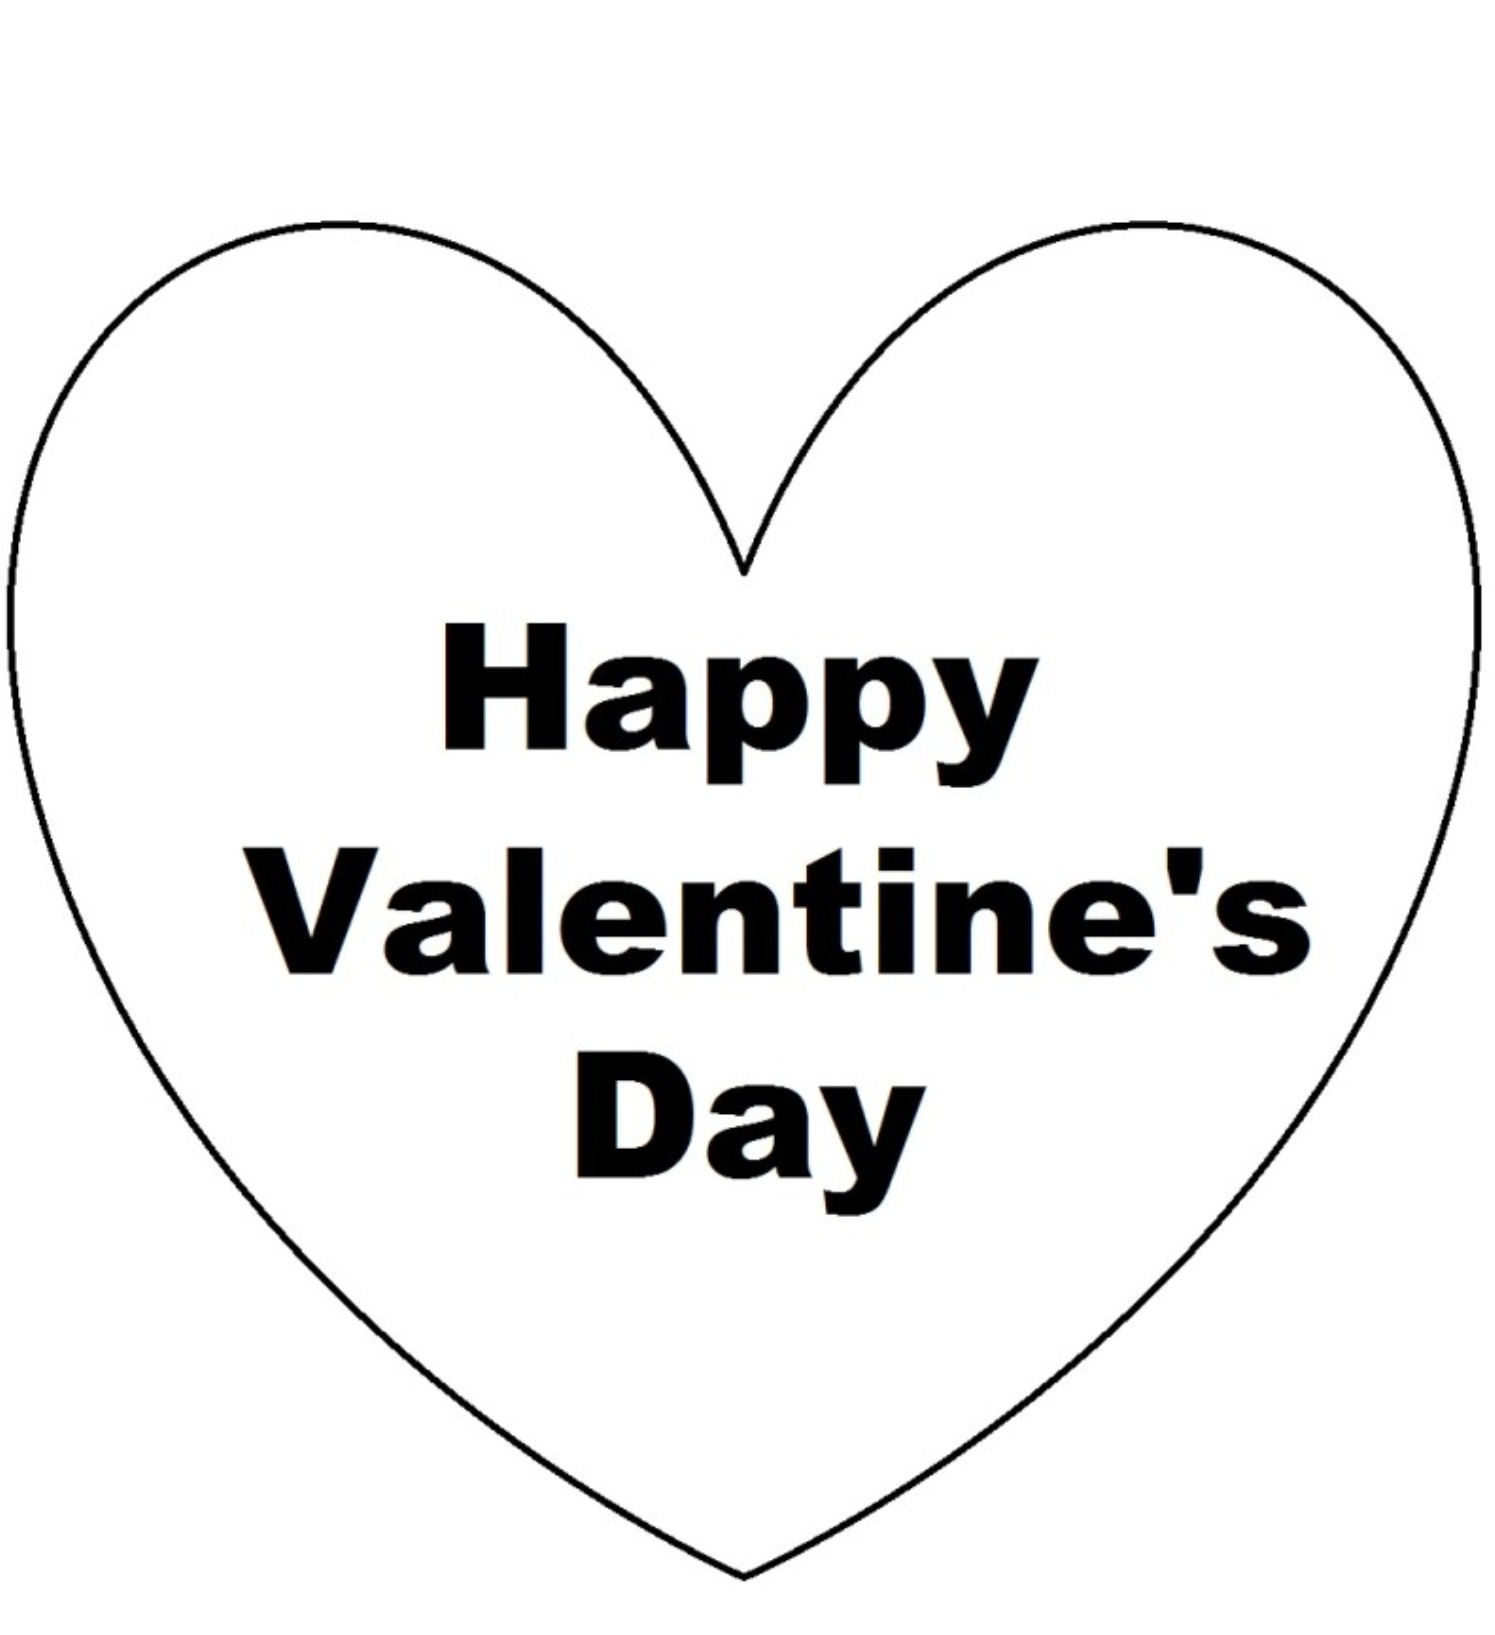 Heart Of Happy Valentines Day Coloring Pages   Coloring Cool